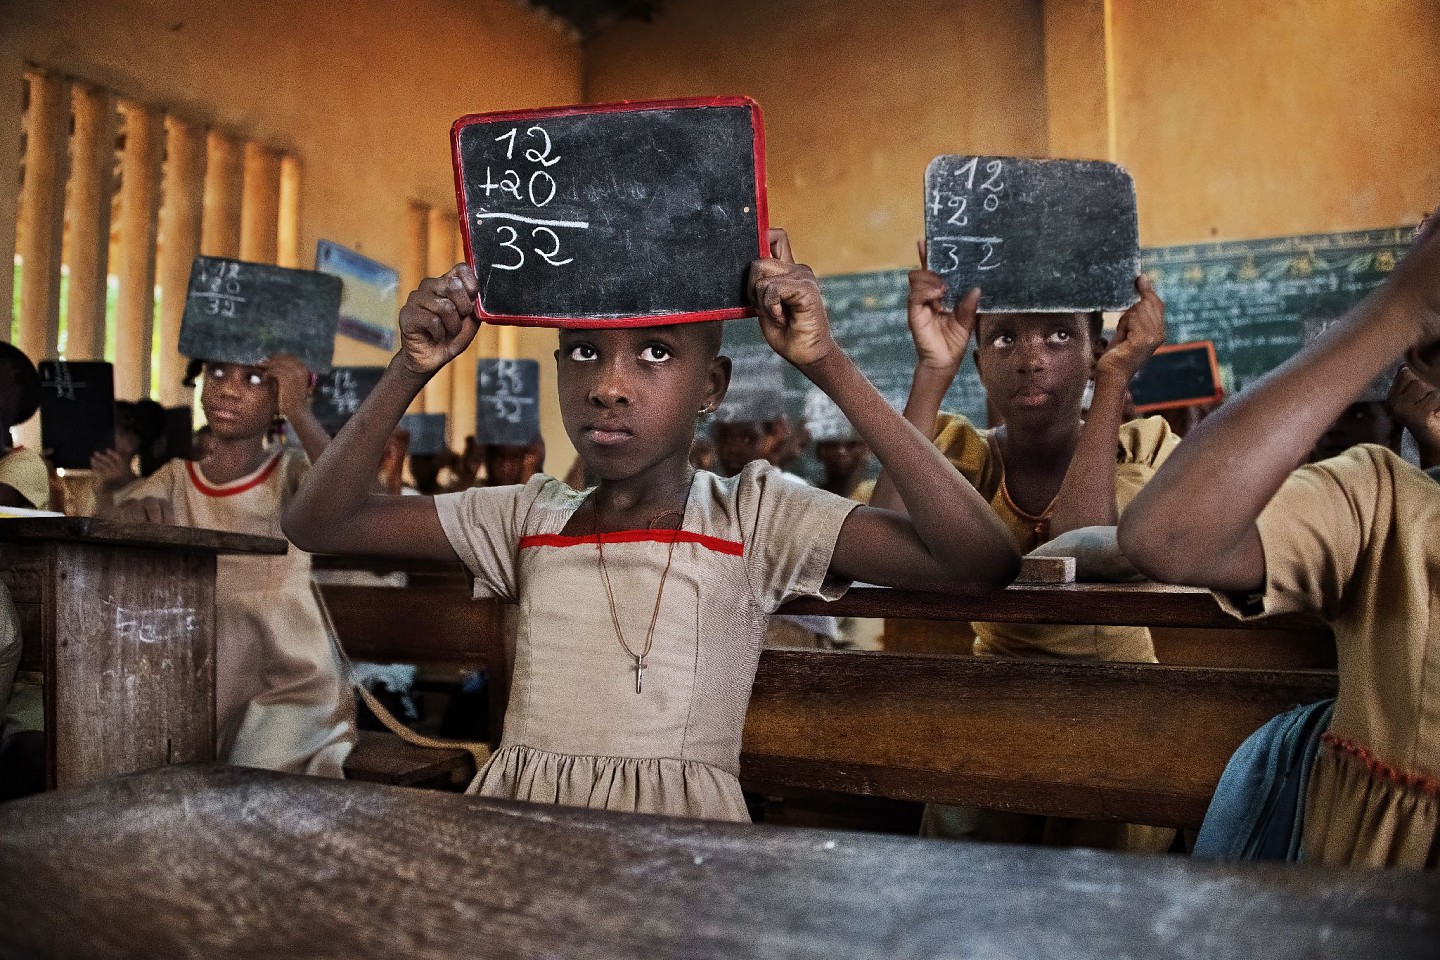 Steve McCurry, Elementary School Math Class, 2017
FujiFlex Crystal Archive Print
Price/Size on request